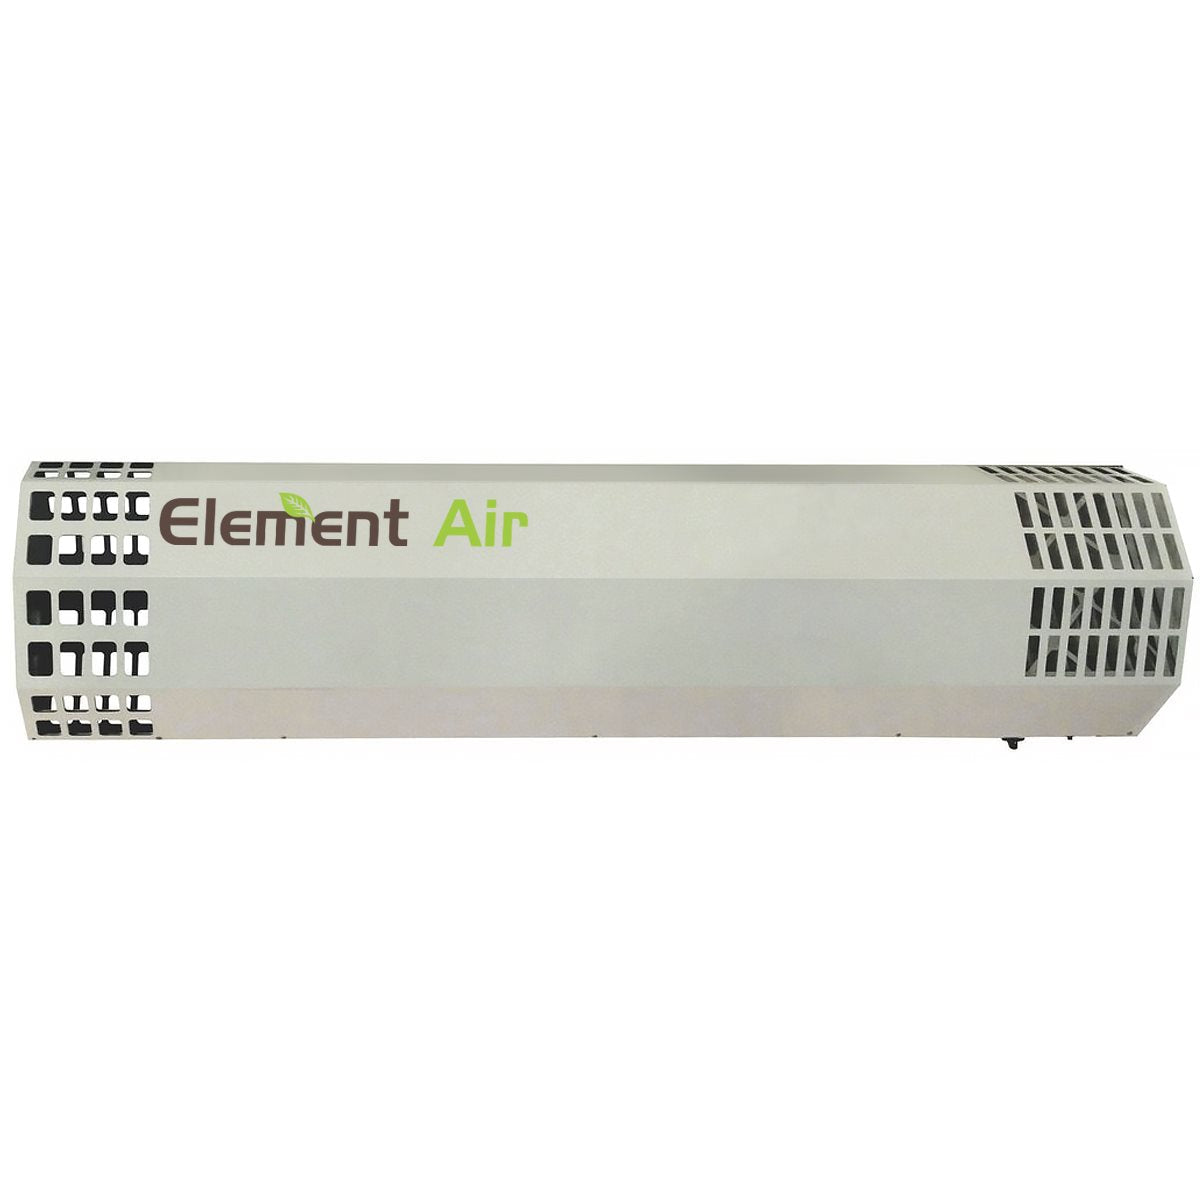 Element Air Tower Wall Mount Unit